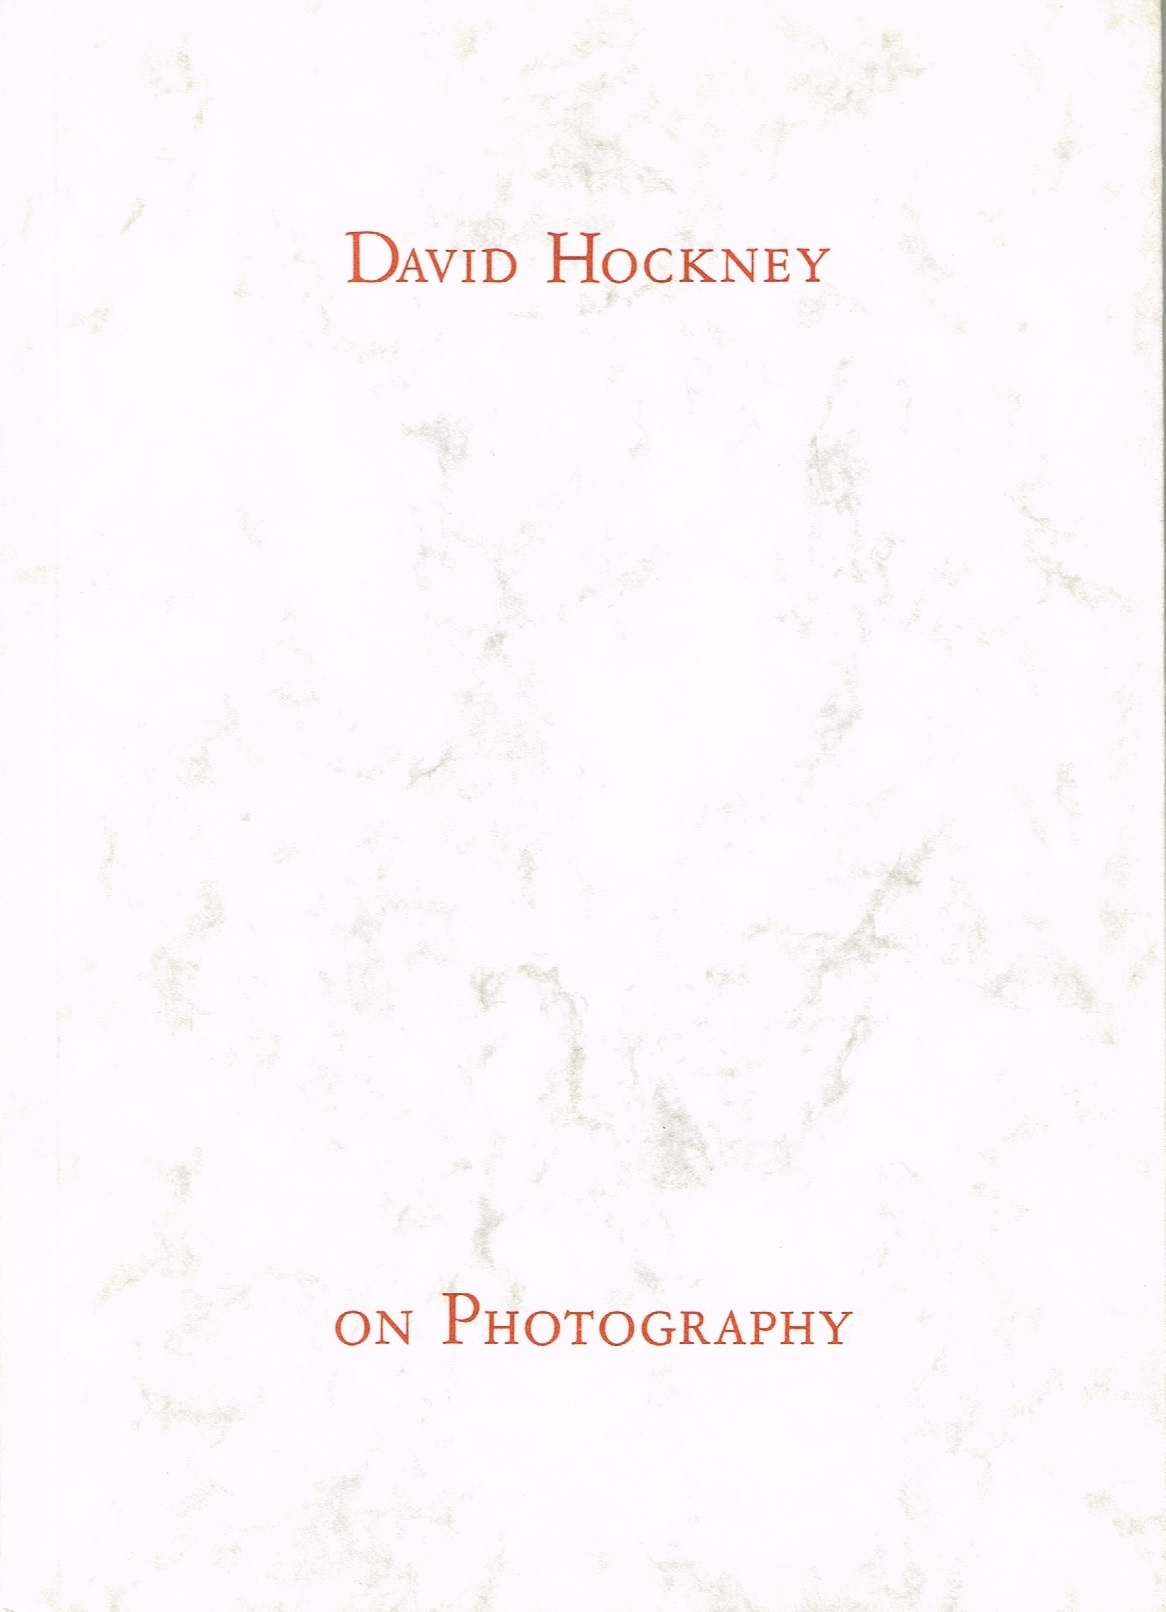 (HOCKNEY, DAVID). Hockney, David. Introduction by Andre Emmerich - DAVID HOCKNEY ON PHOTOGRAPHY: A LECTURE AT THE VICTORIA AND ALBERT MUSEUM NOVEMBER 1983